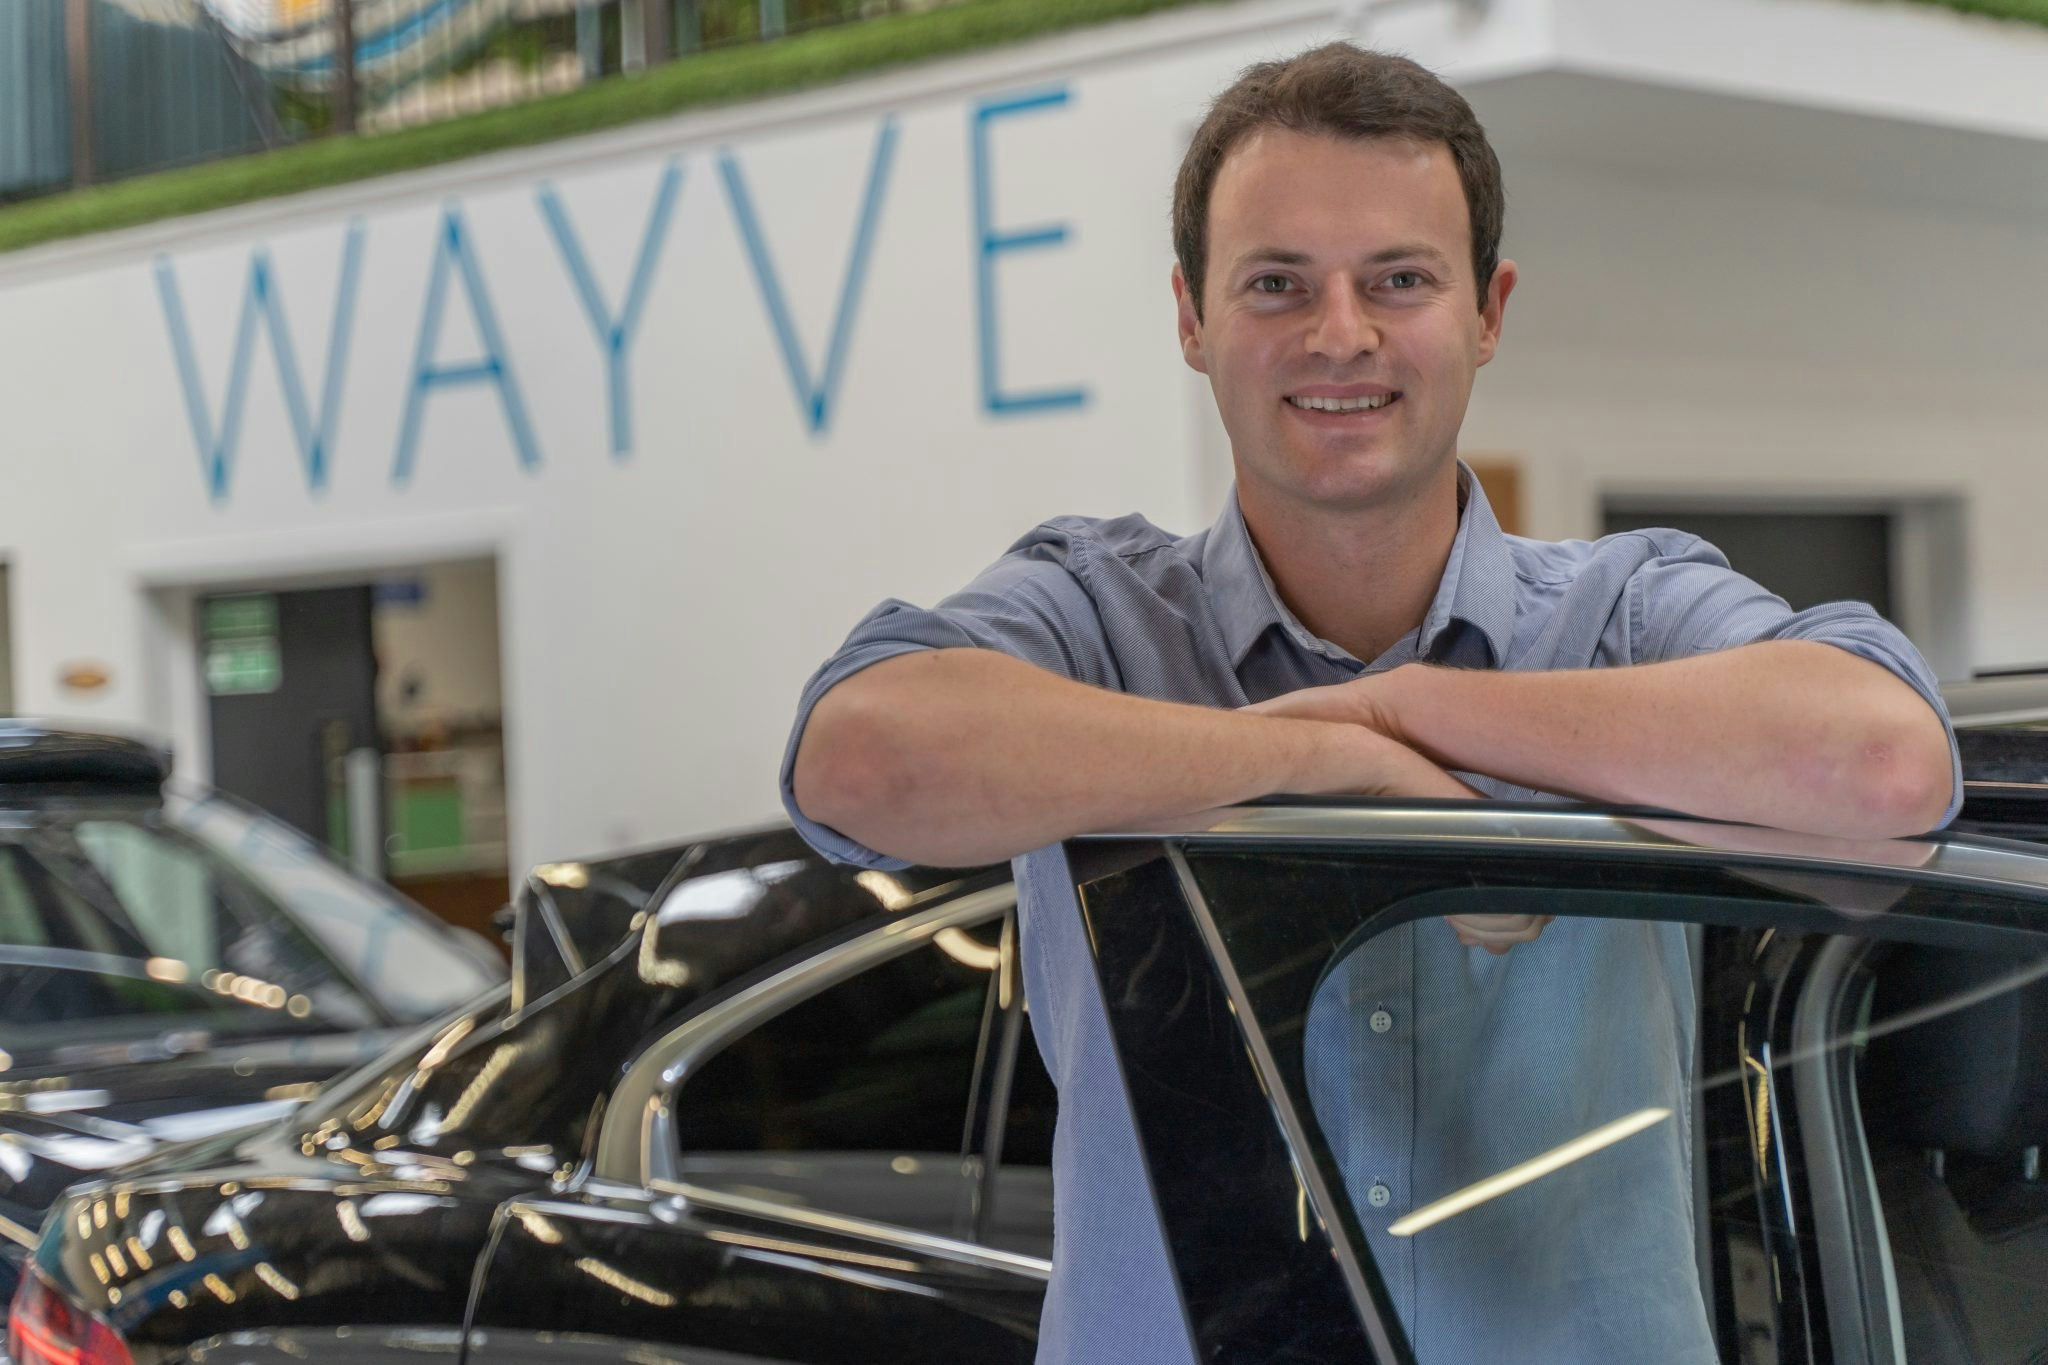 An image of Alex Kendall, CEO of Wayve, leaning against at car door.